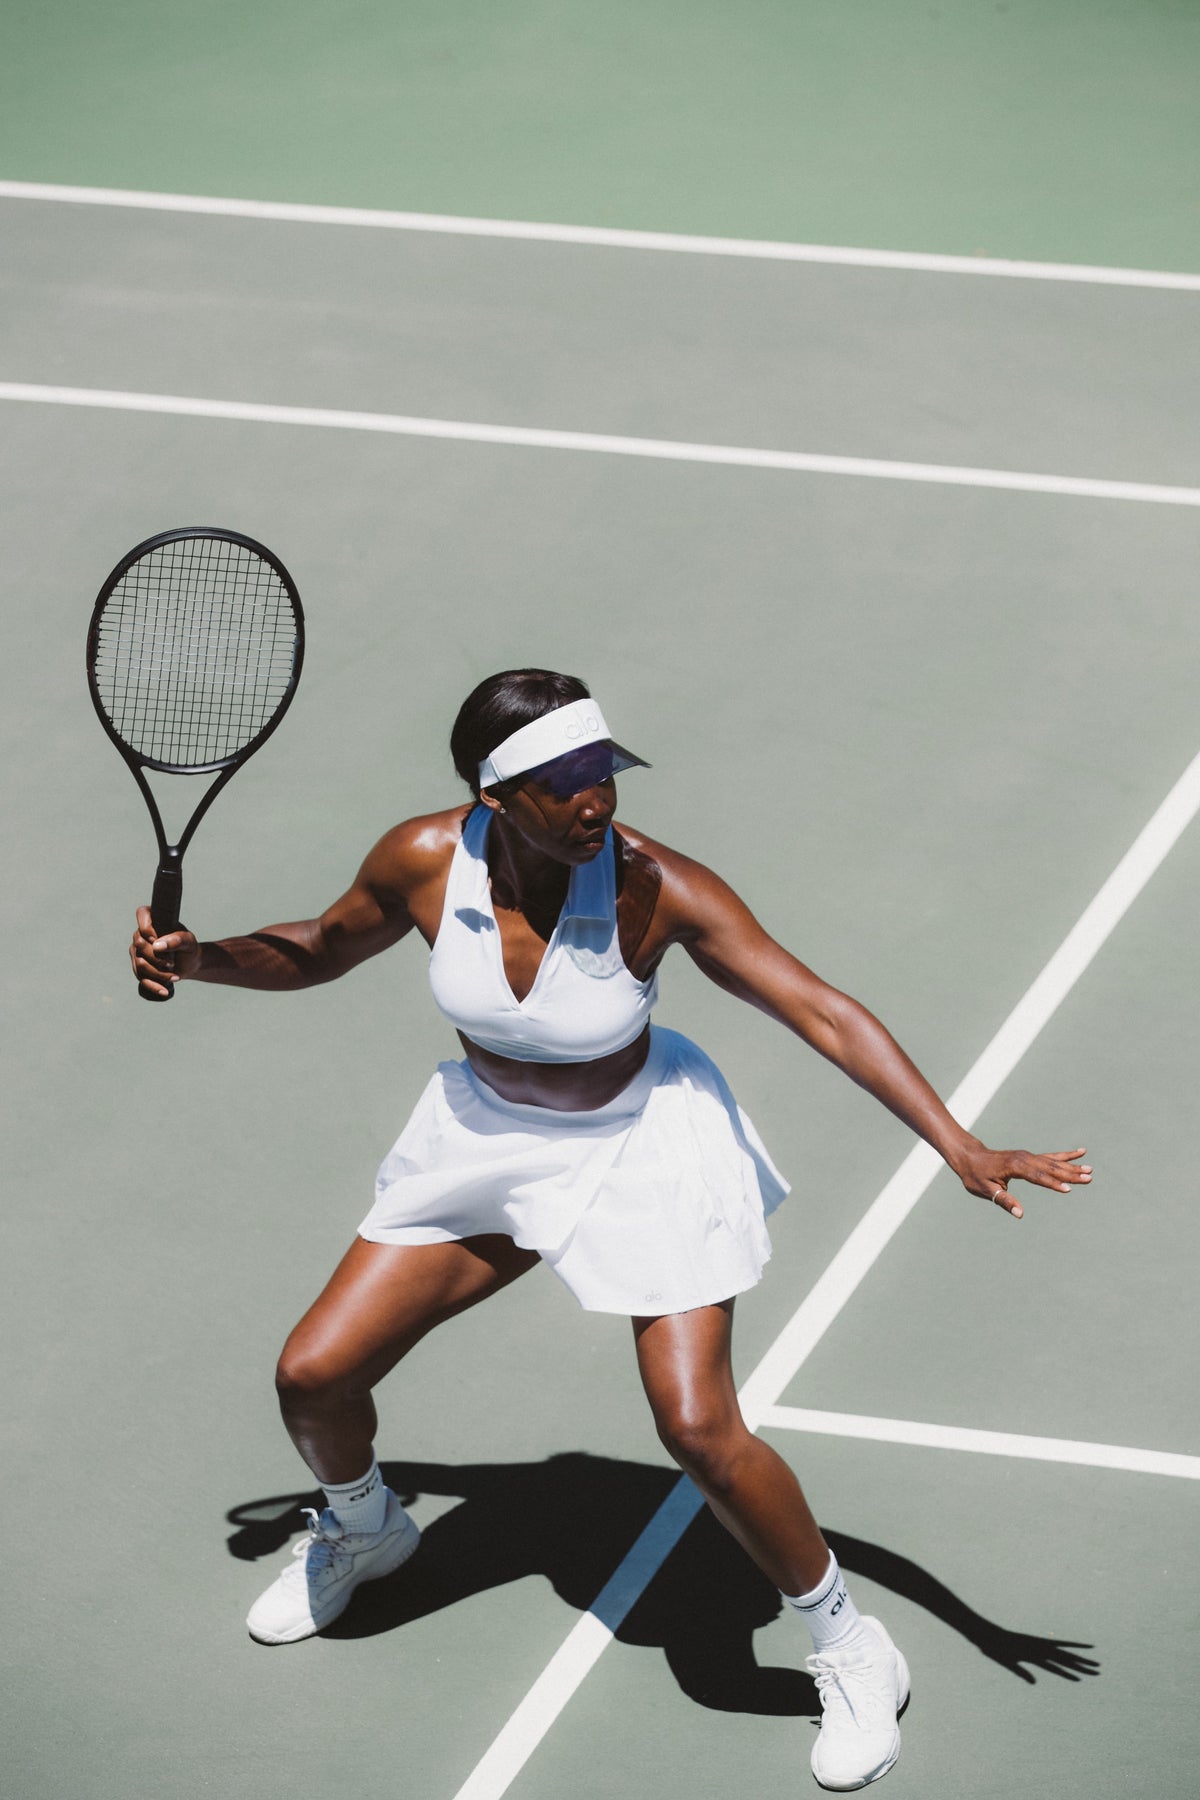 The Tennis Edit: High Performance On & Off The Court